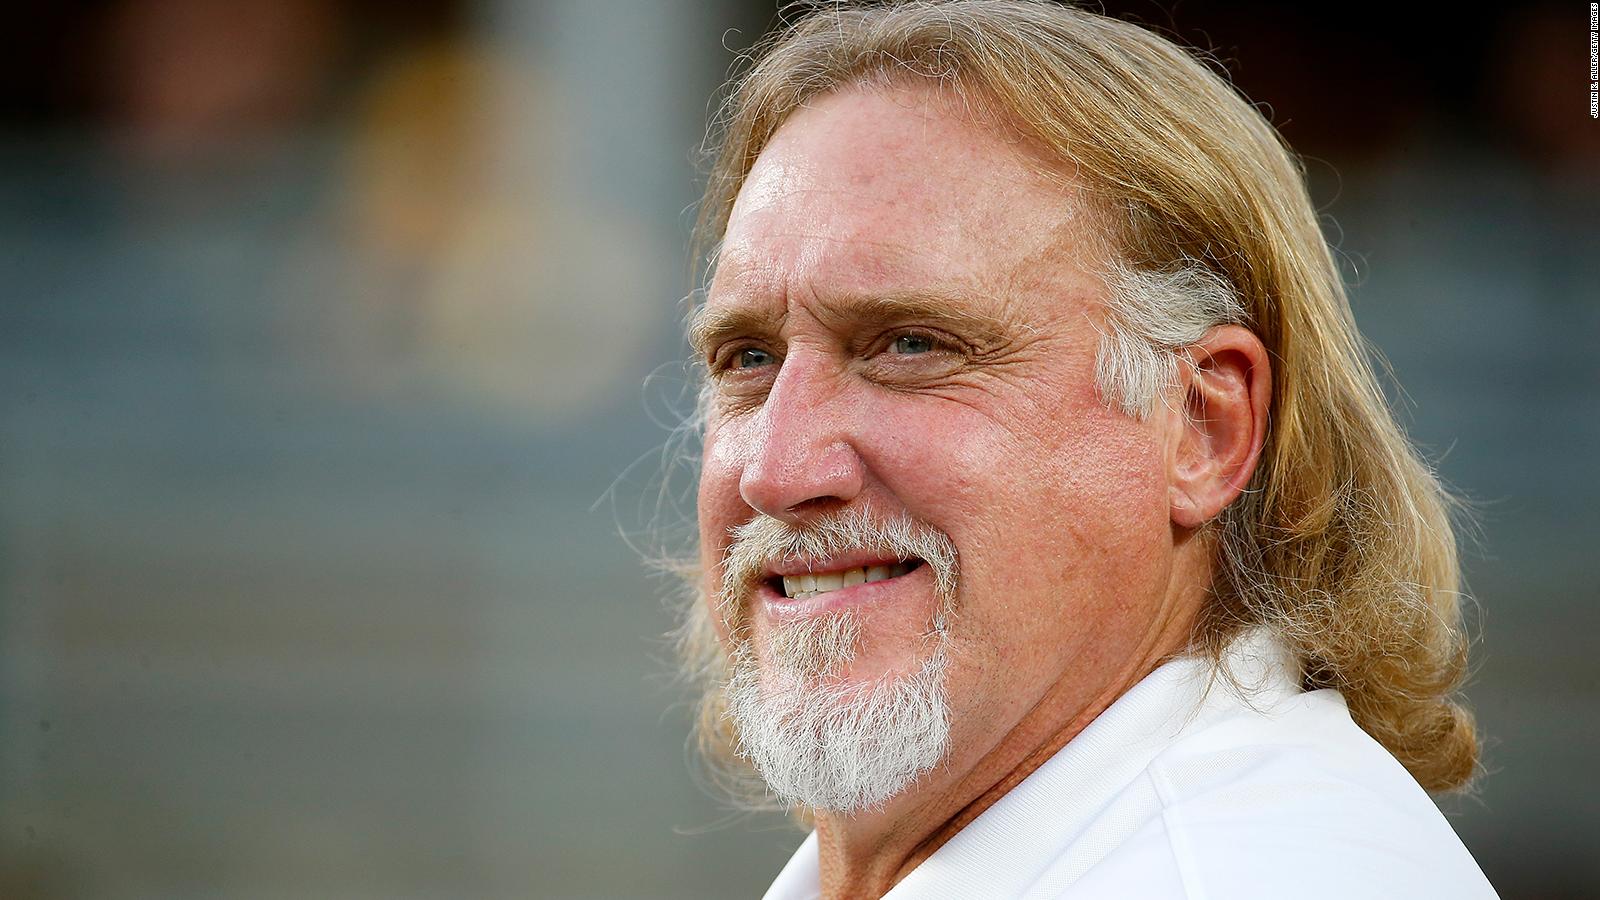 Kevin Greene, NFL sack legend and Hall of Famer, has died at age 58 CNN